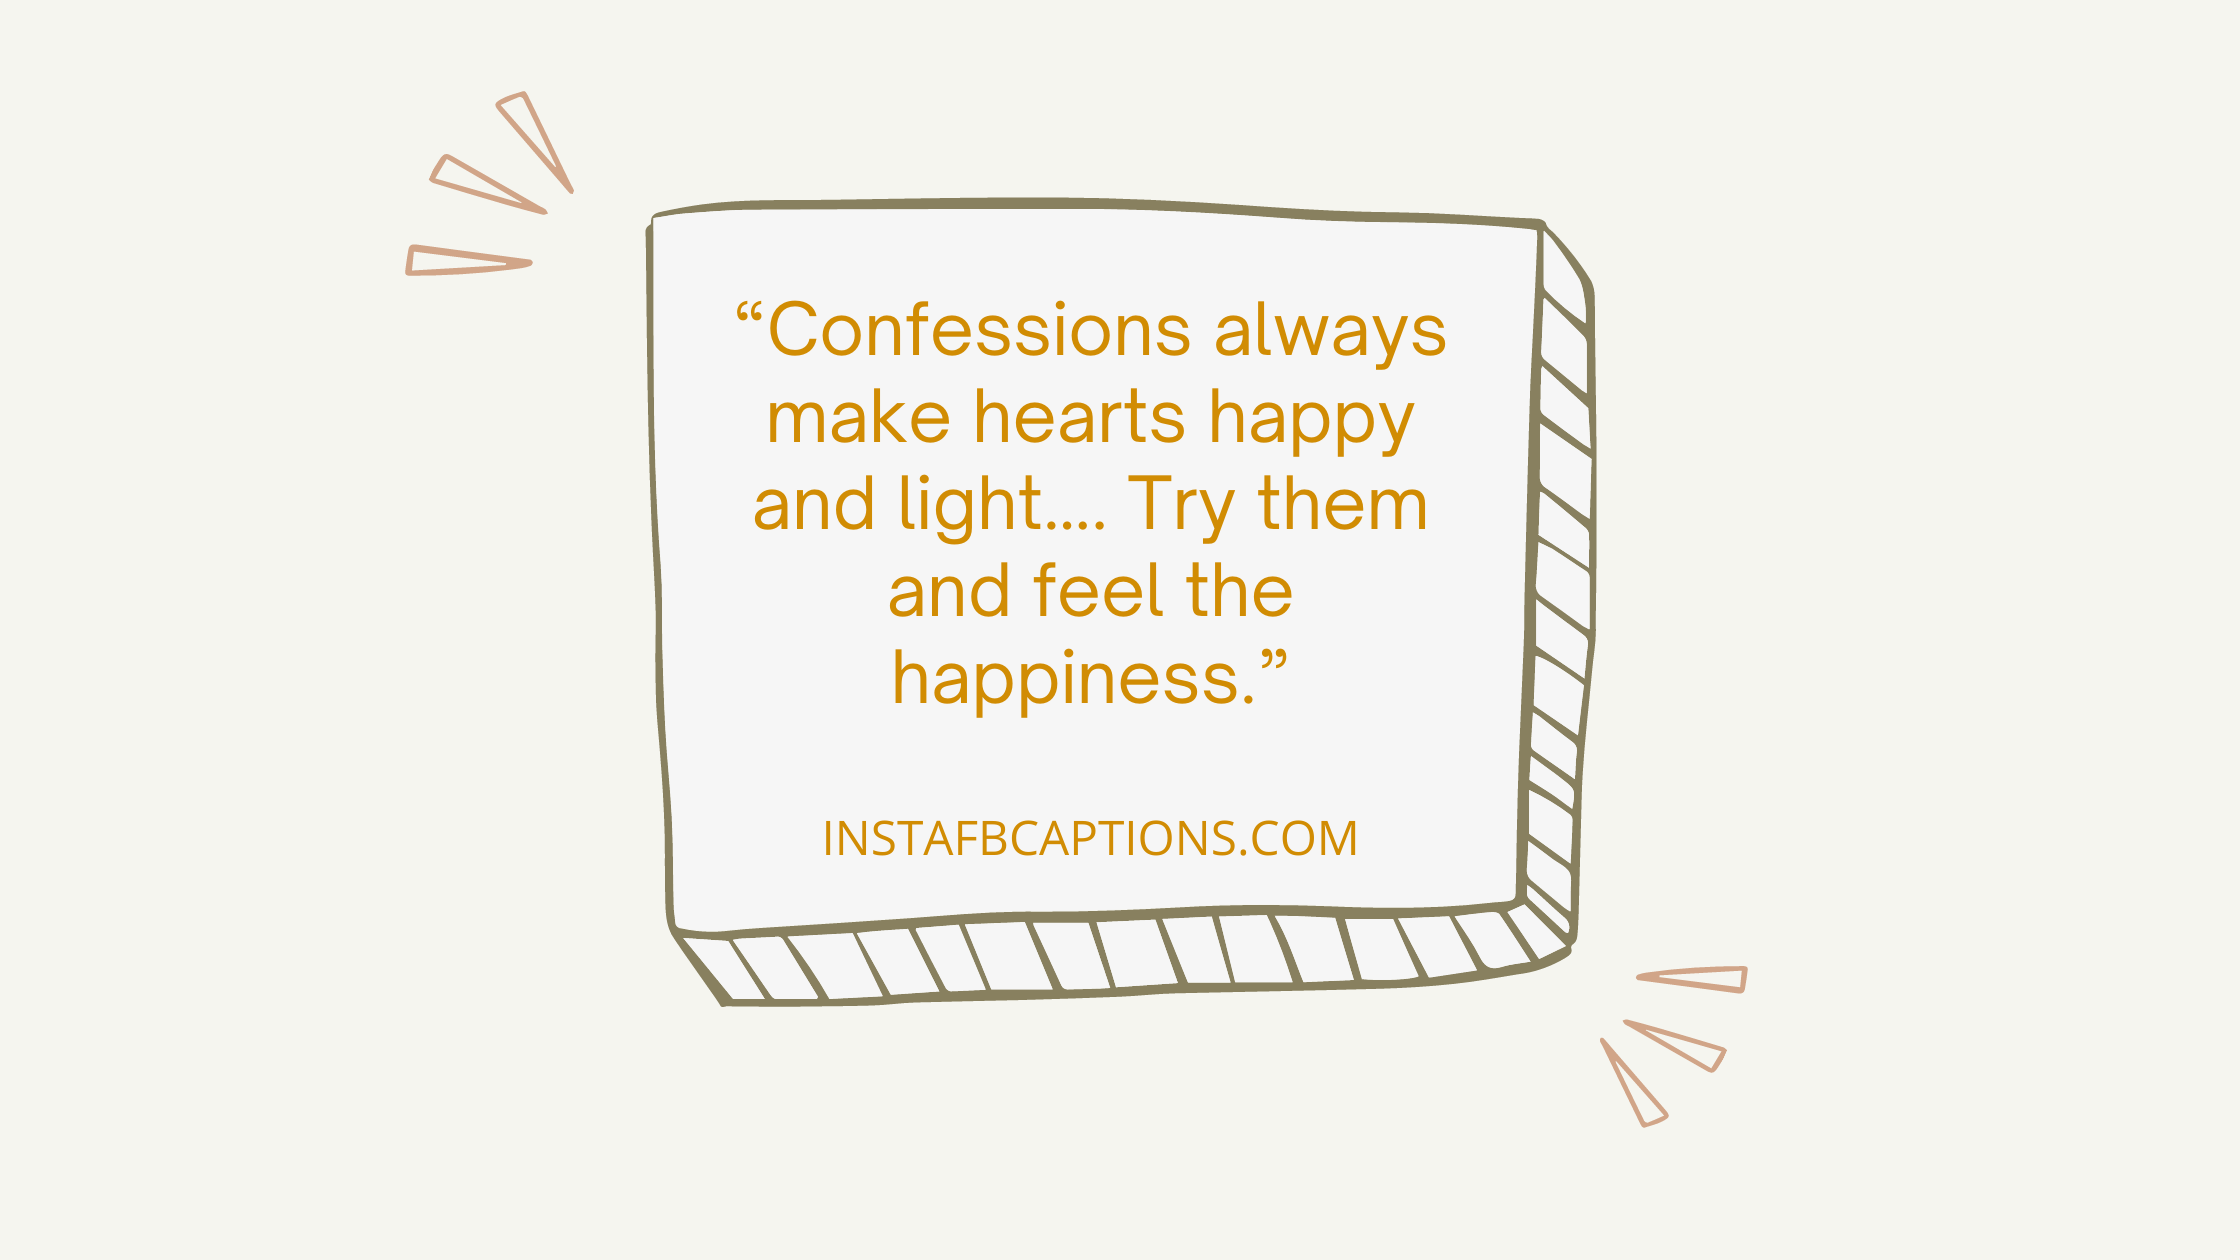 Amazing Happy Confession Day Wishes  - Amazing Happy Confession Day Wishes - 103 Happy Confession Day Instagram Captions in 2023